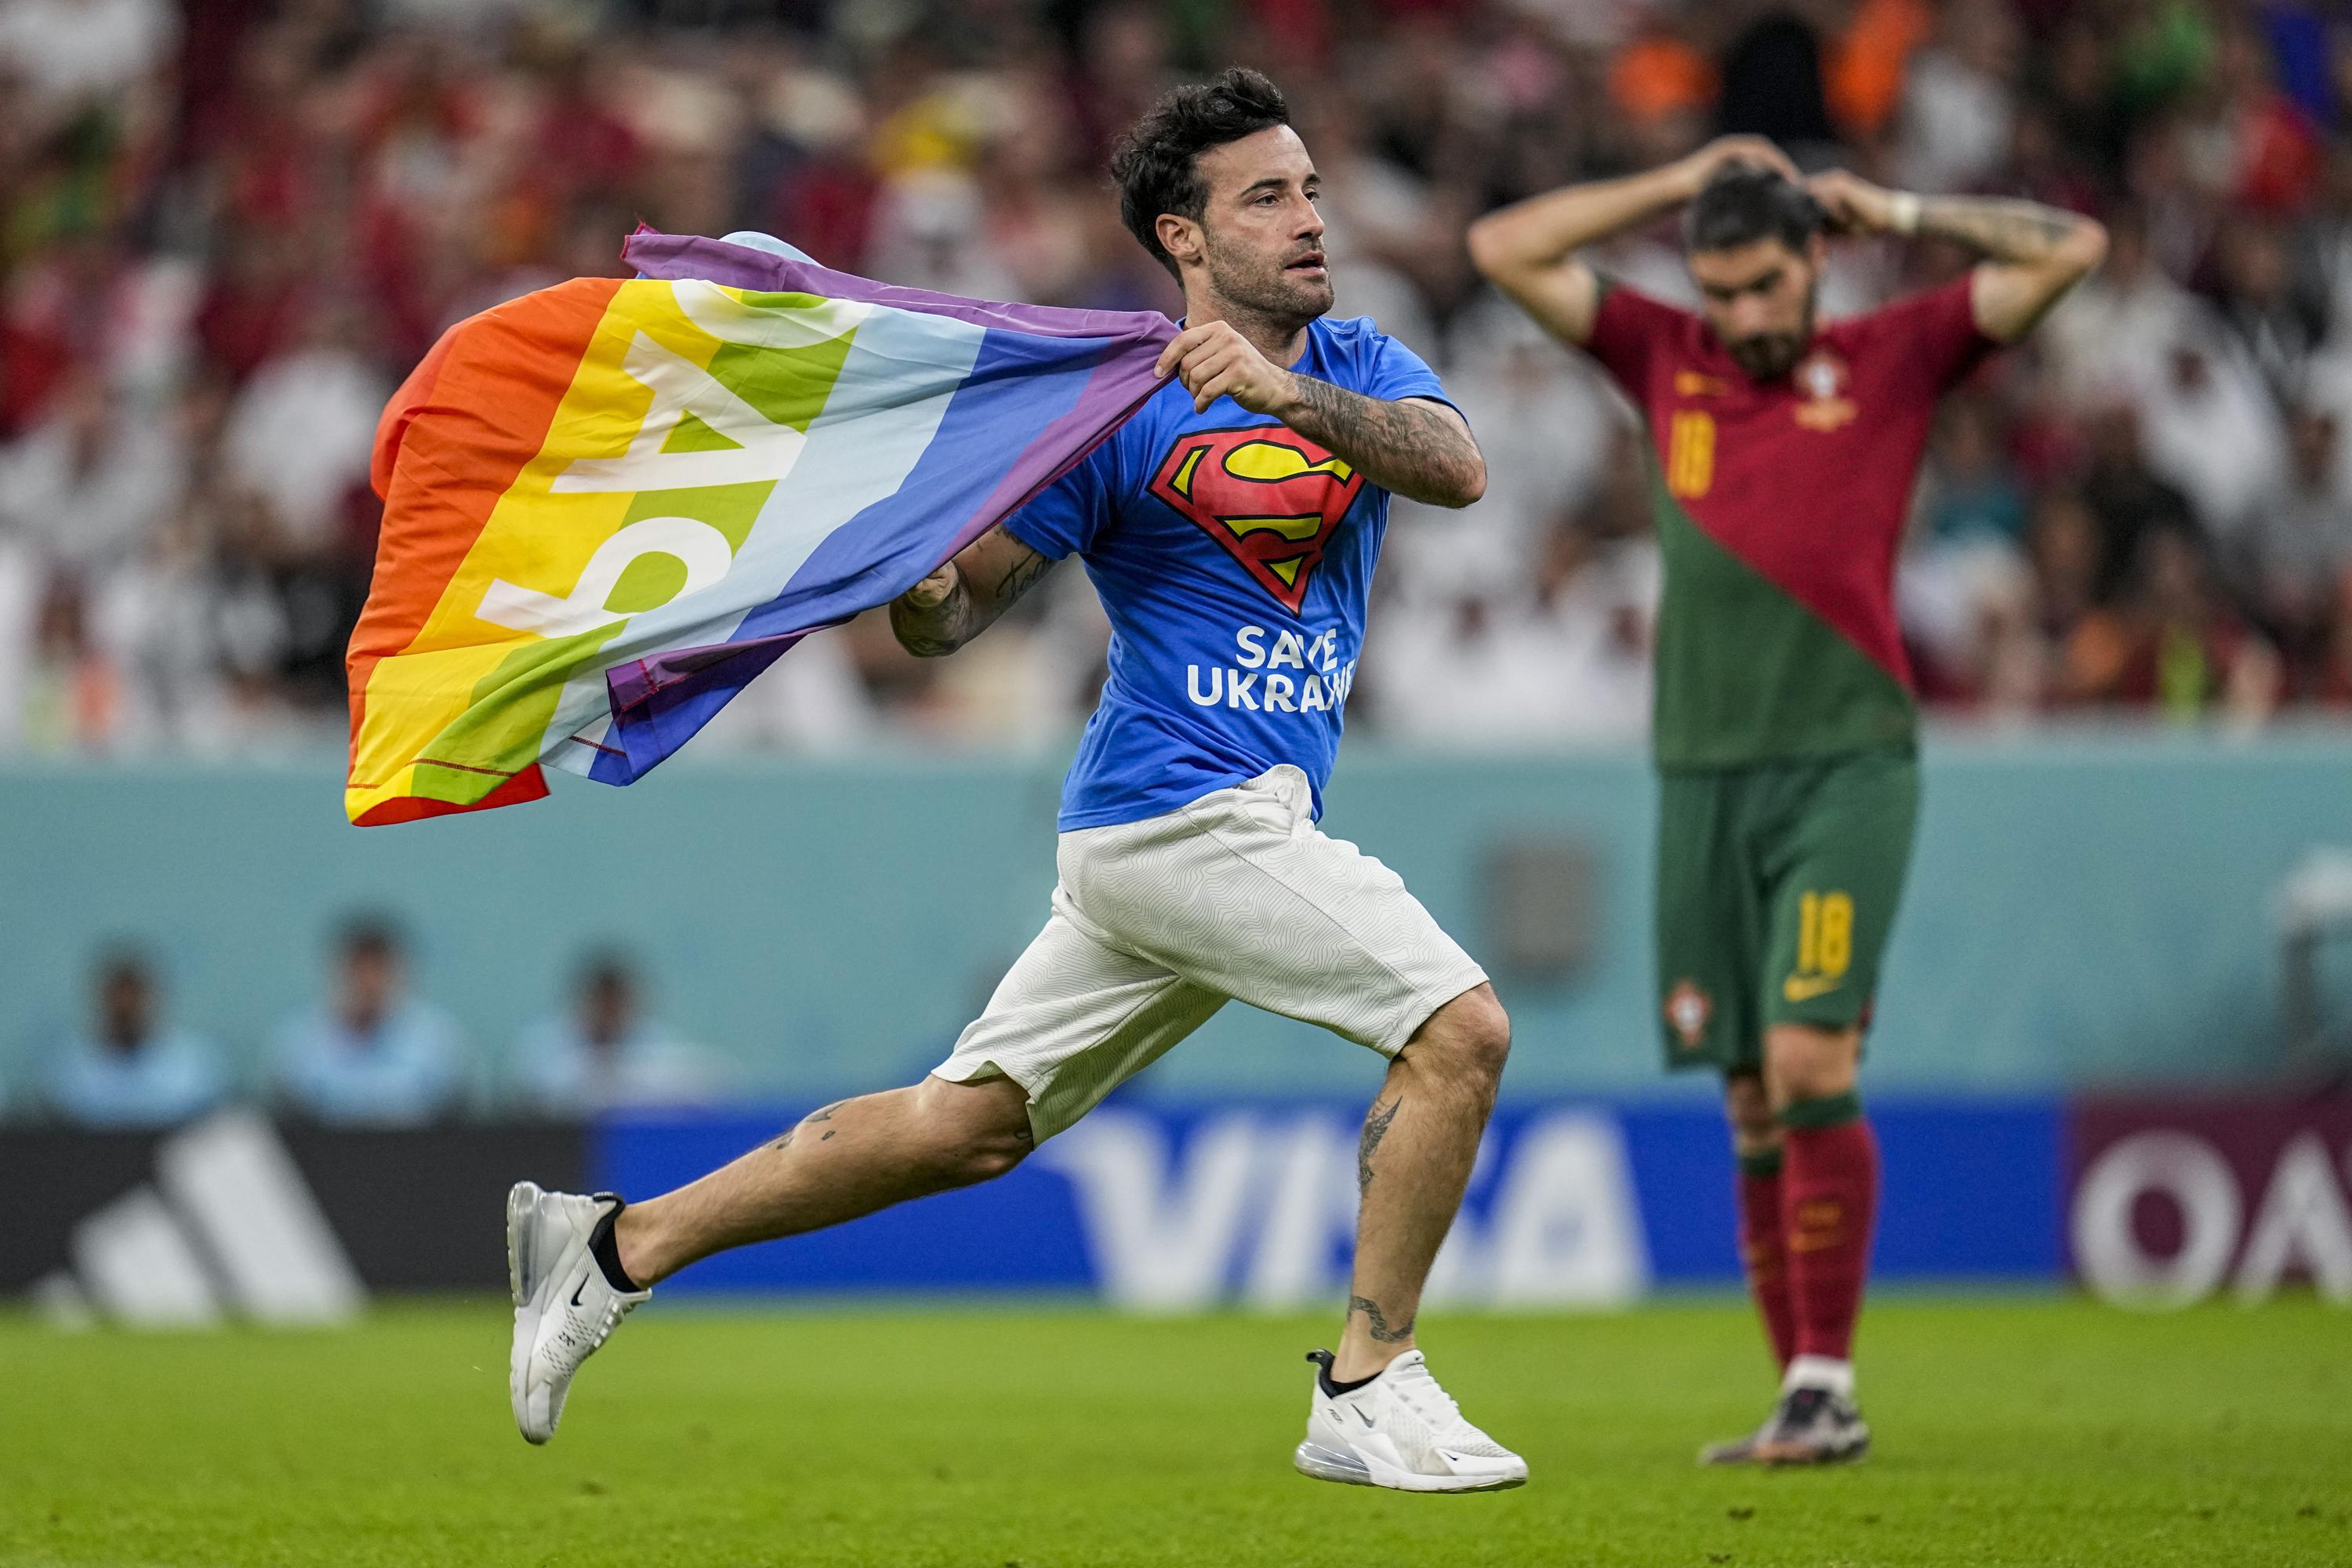 Protester with rainbow flag banned from World Cup matches